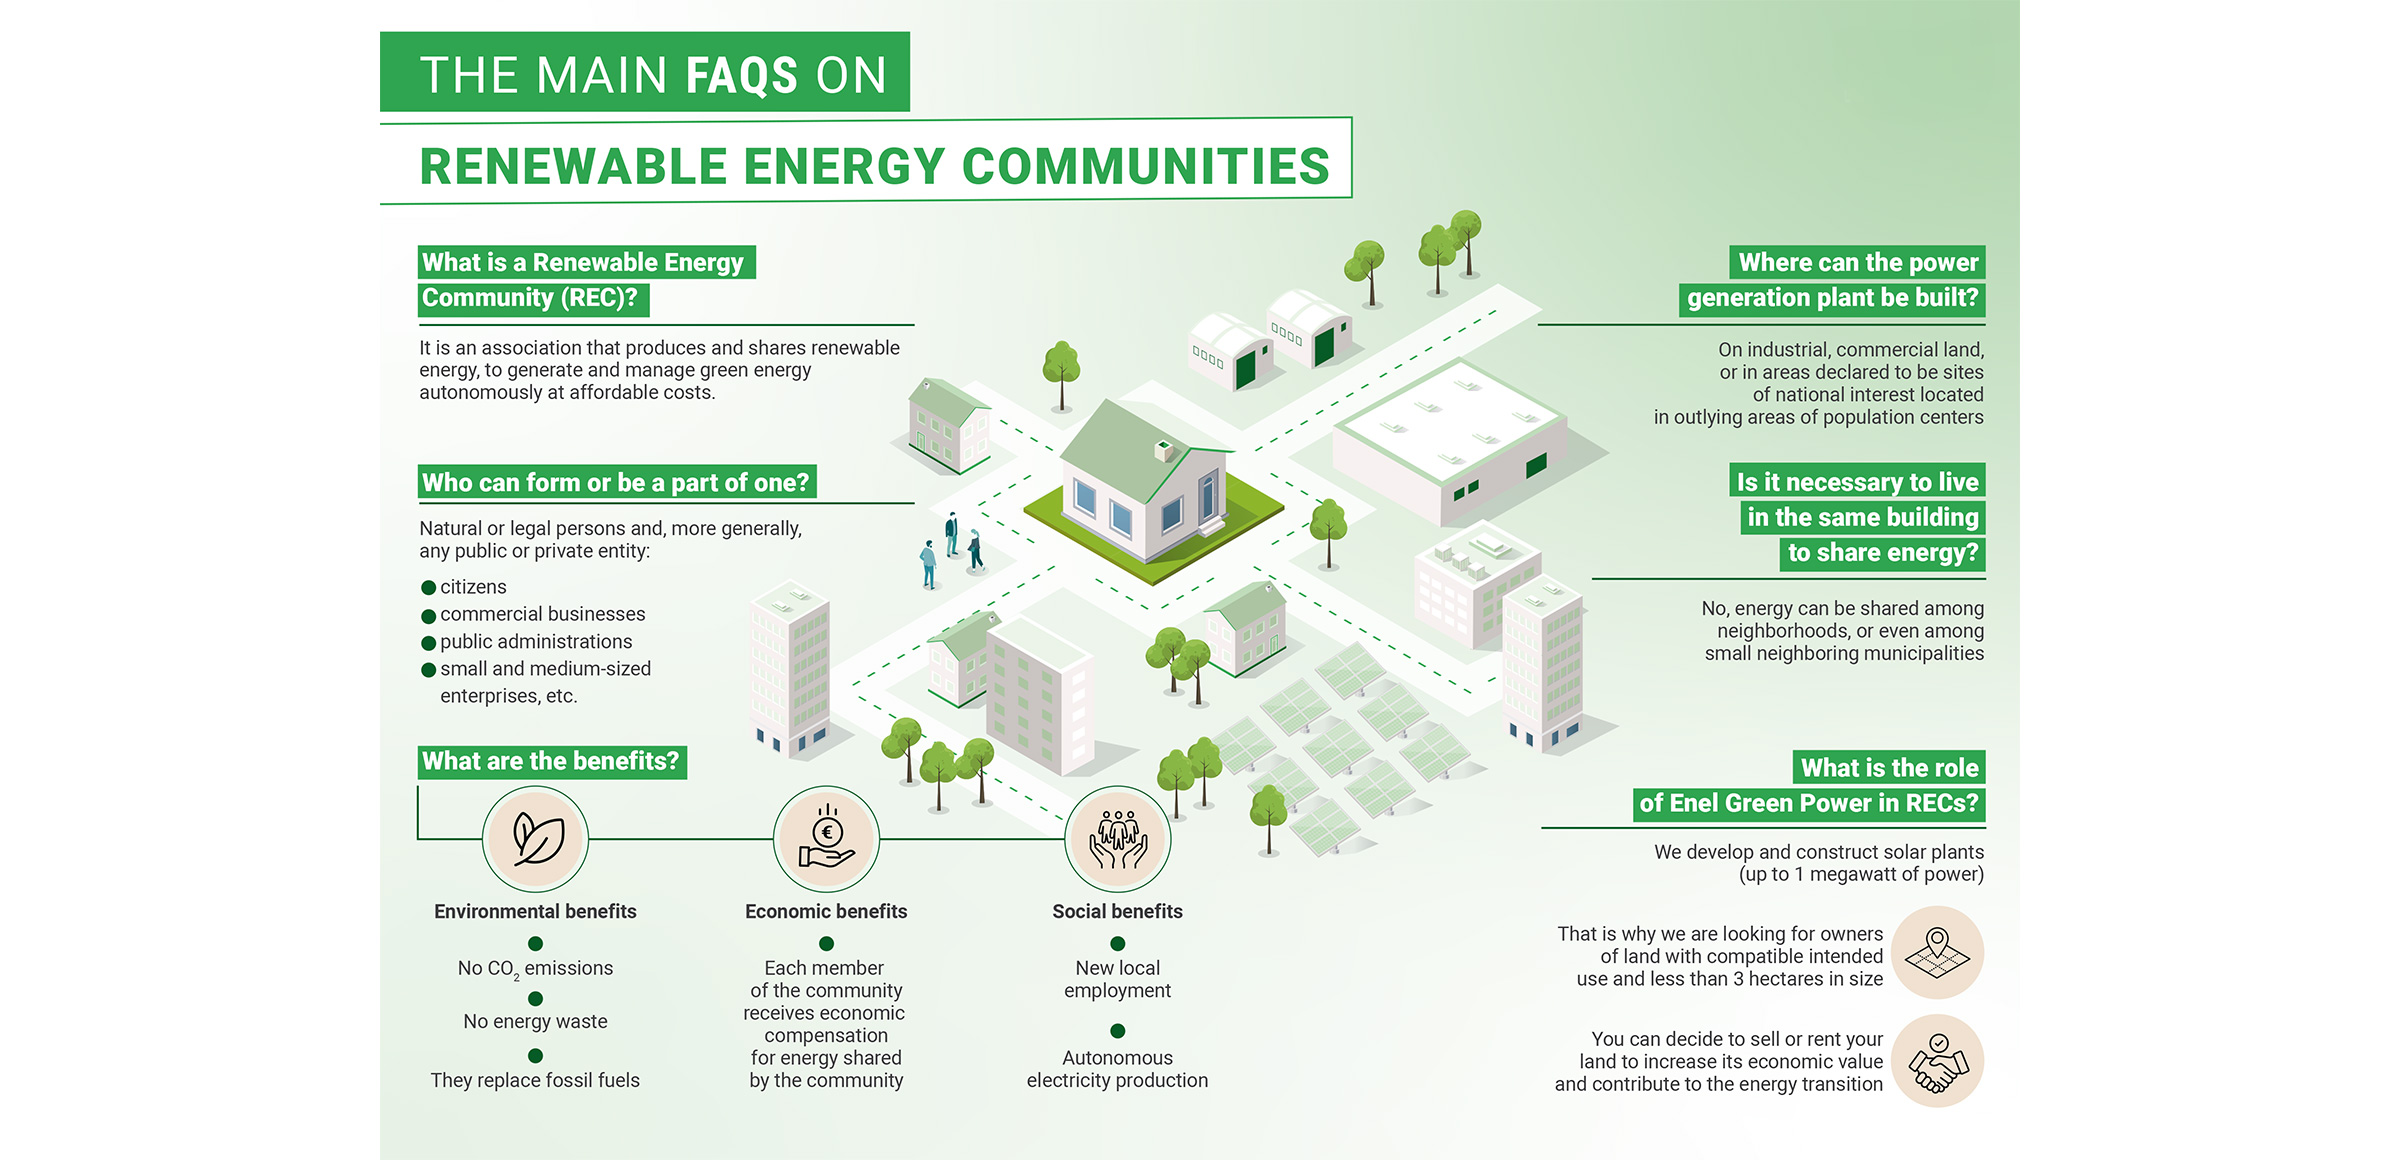 Frequently asked questions about Renewable Energy Communities (RECs)